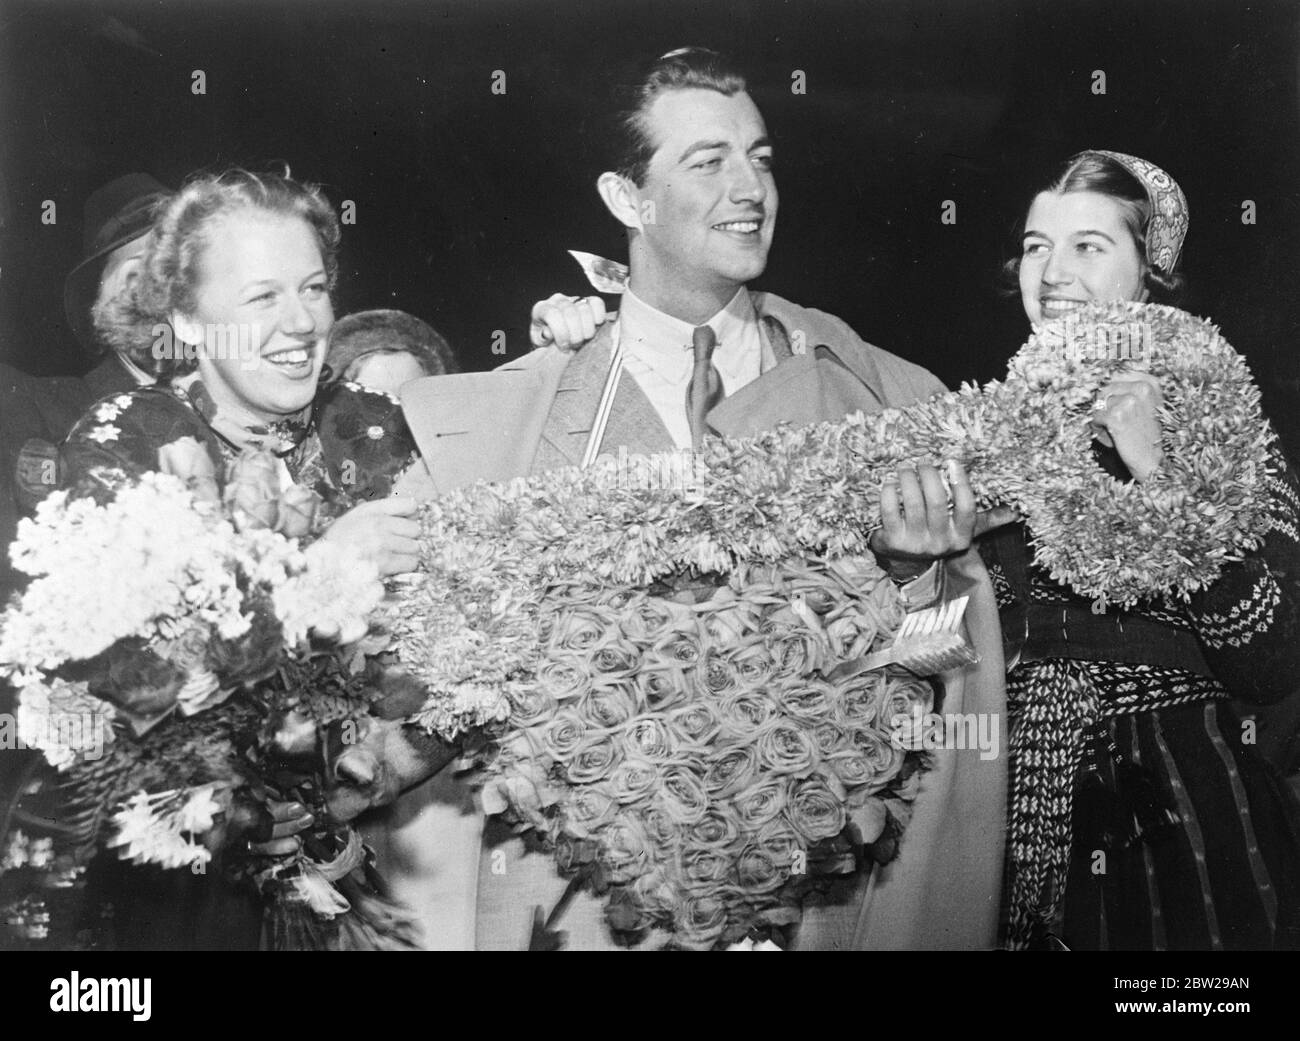 Feminine Sweden presents Robert Taylor, with the key to her heart!. A huge floral key and a heart of flowers were presented to Robert Taylor, the film actor, by two Swedish girls when he arrived at Bromma aerodrome, Stockholm. The girls were elected for the honour from hundreds of candidates. Photo shows, Robert Taylor, receiving the floral key and heart from the Swedish girls at Bromma Aerodrome, Stockholm. 26 November 1937 Stock Photo